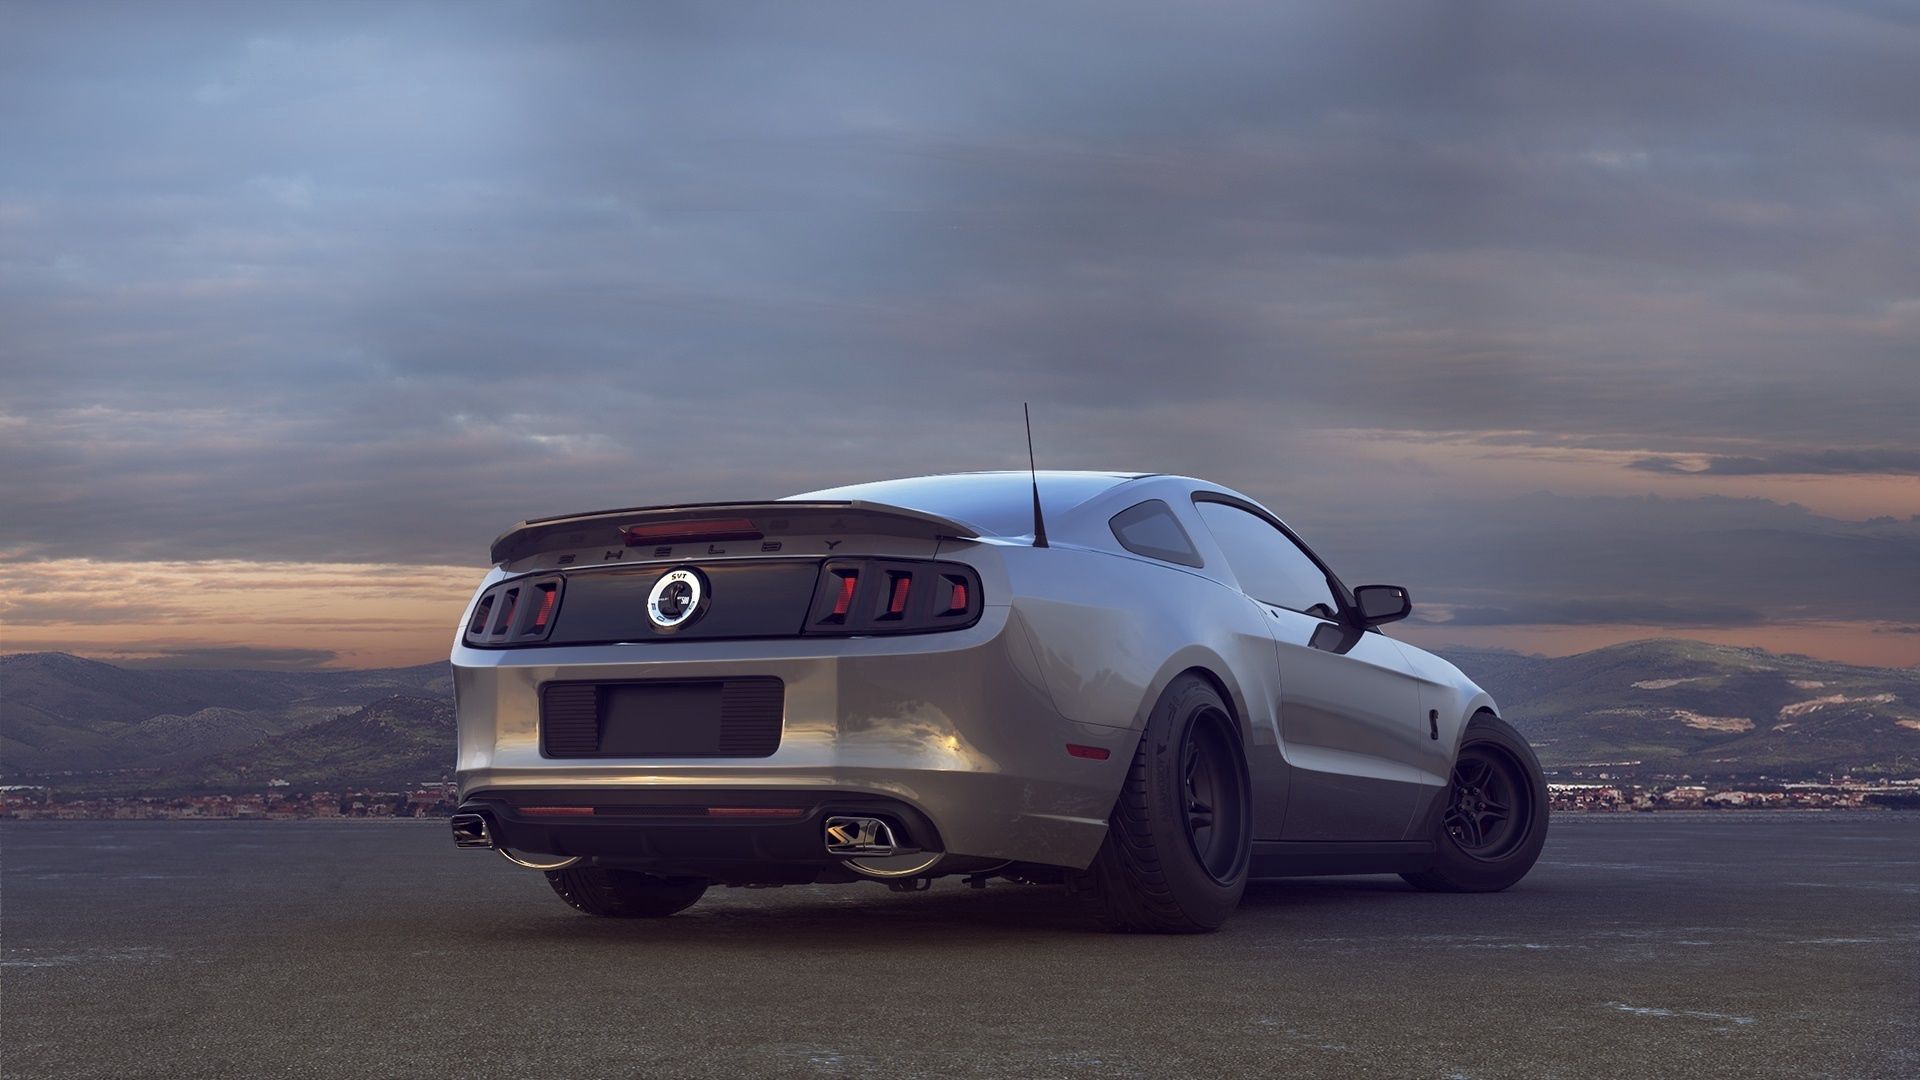 Download wallpaper 1920x1080 shelby, car, gt mustang, drag, ford HD background